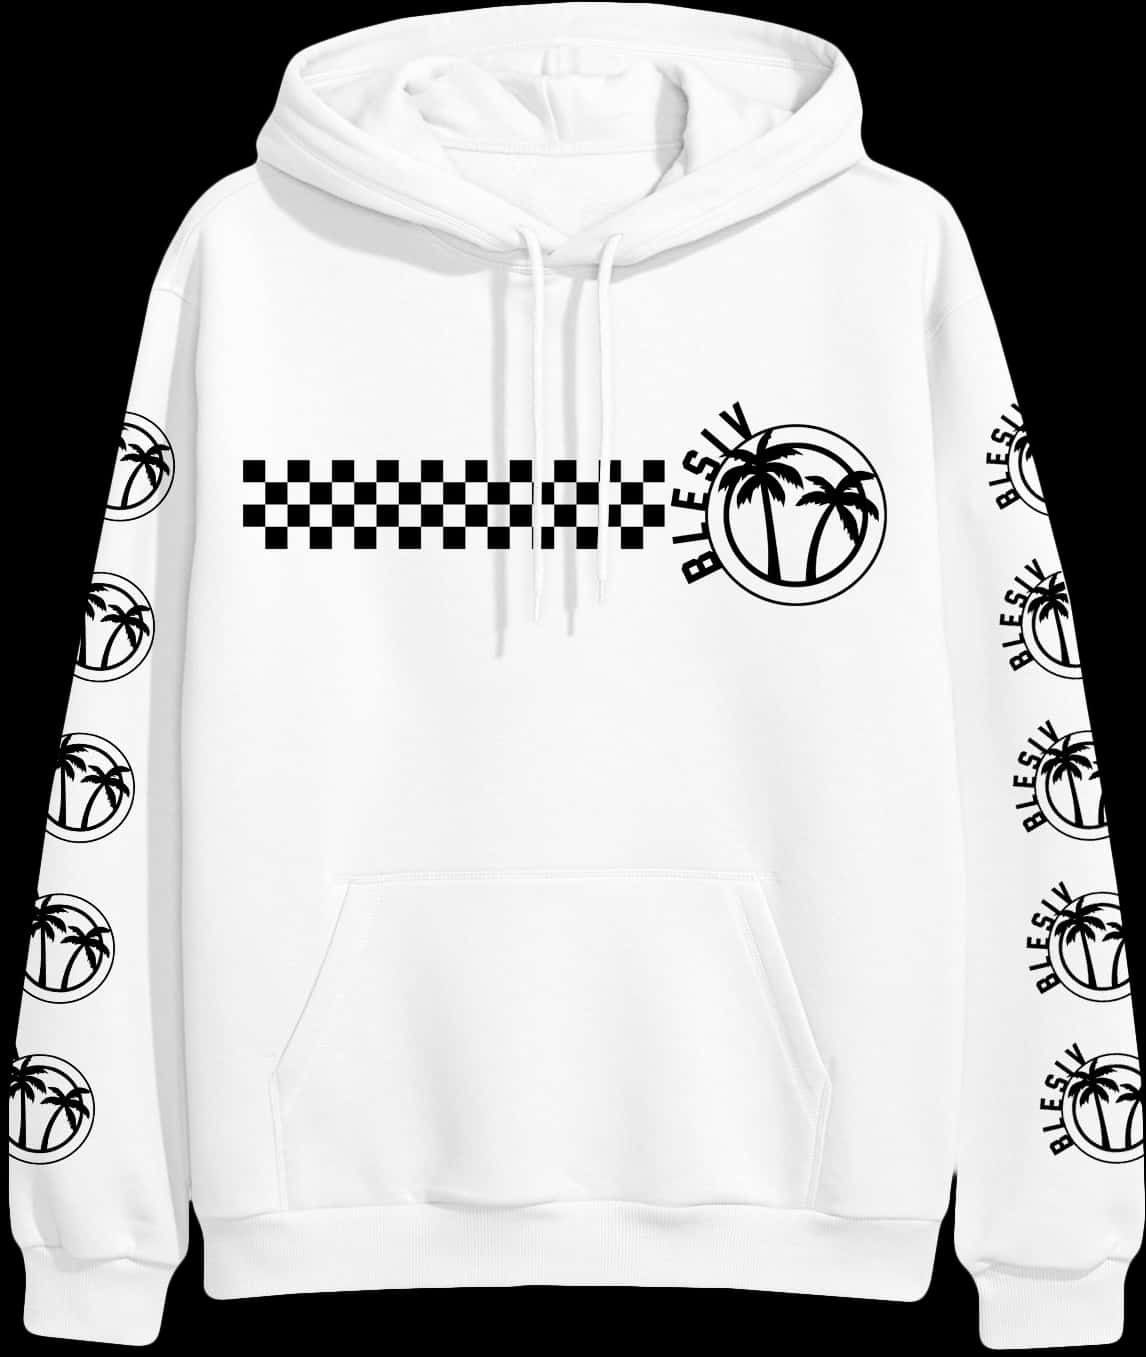 A White Hoodie With Black And White Design